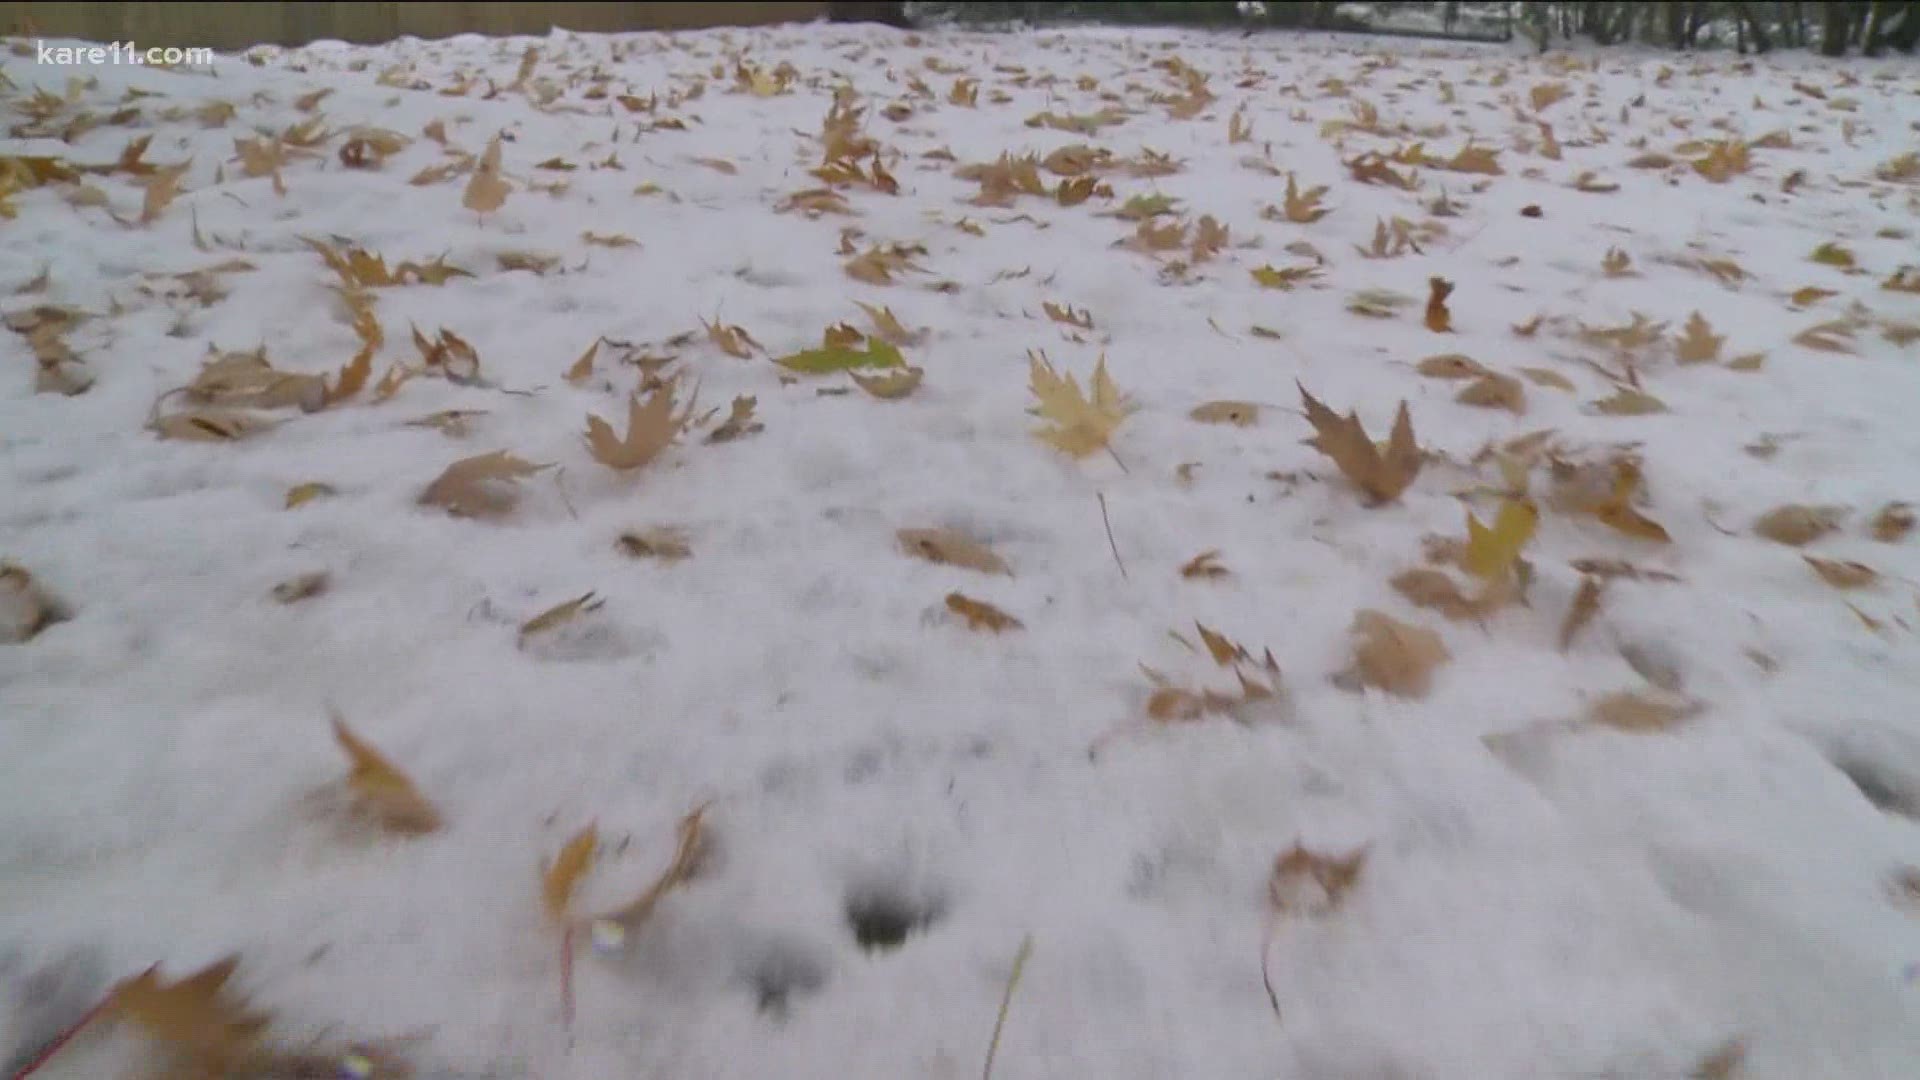 The fall cleanup was interrupted by an unusual snowfall this year. Should homeowners leave the leaves or still try to clean them up